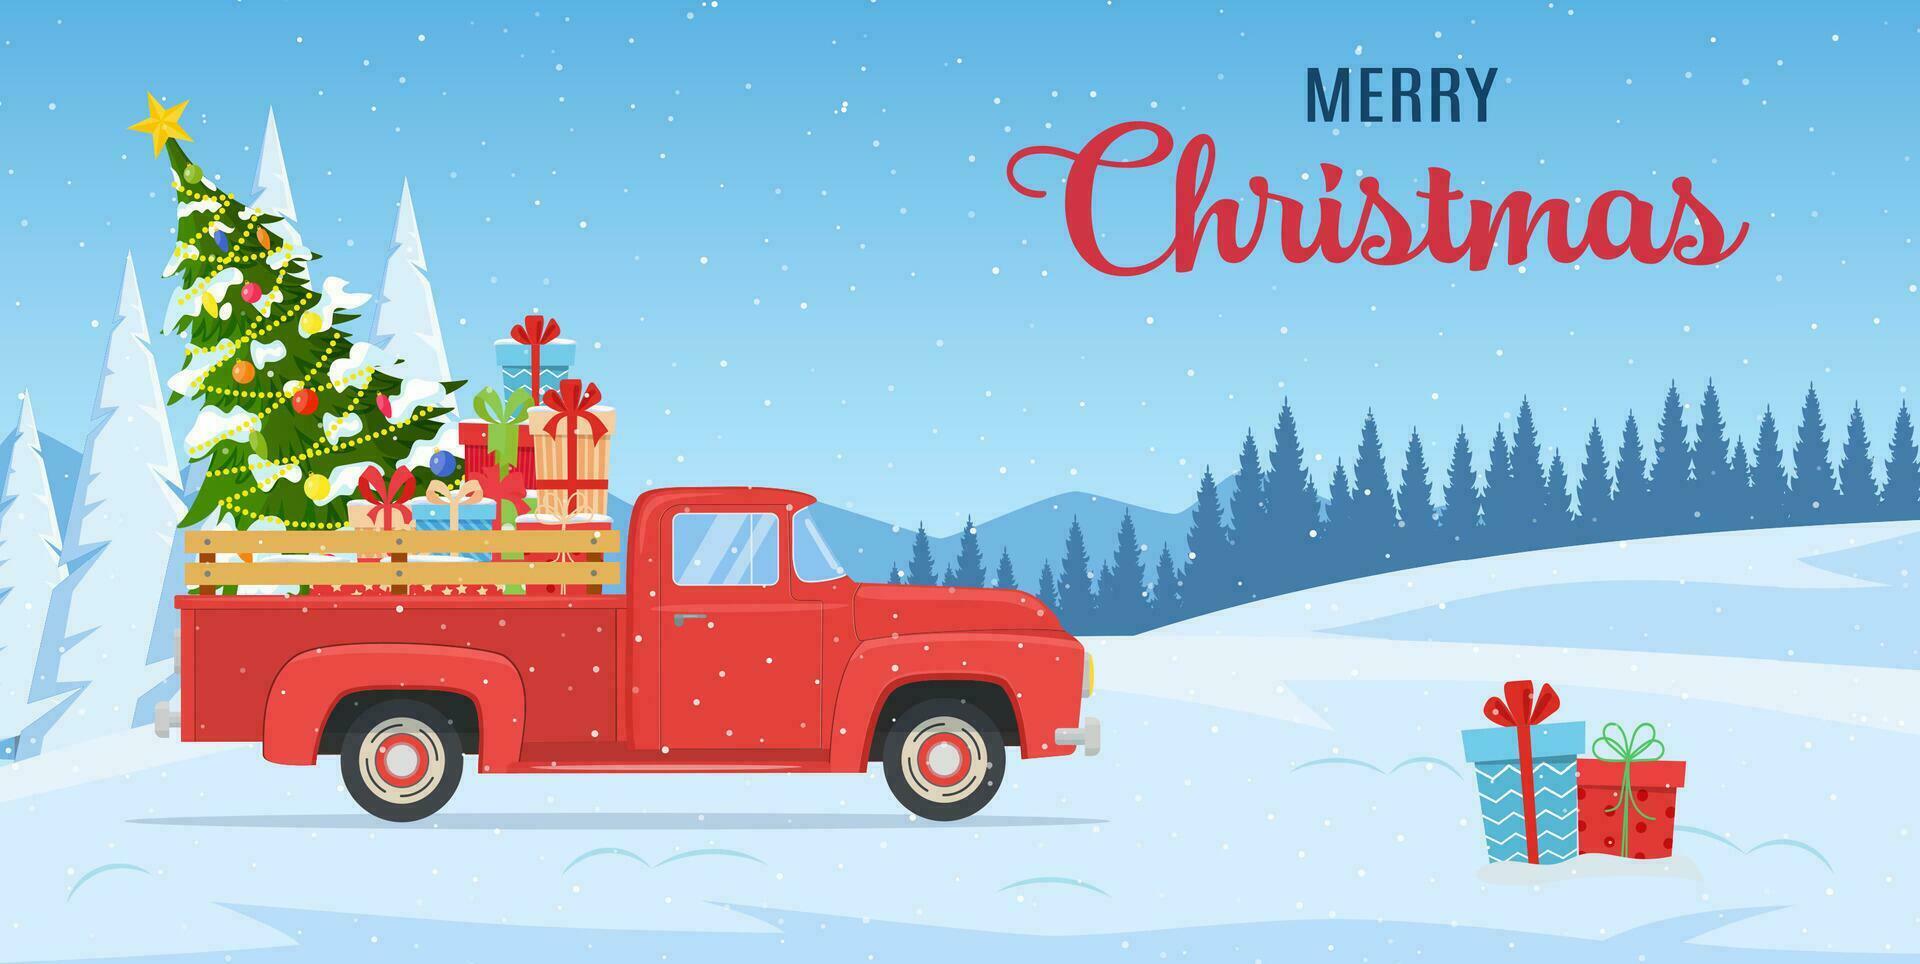 cartoon Christmas and New Year greeting card.Christmas card or poster design with retro red pickup truck with christmas tree and gift boxes on board. Vector illustration in flat style